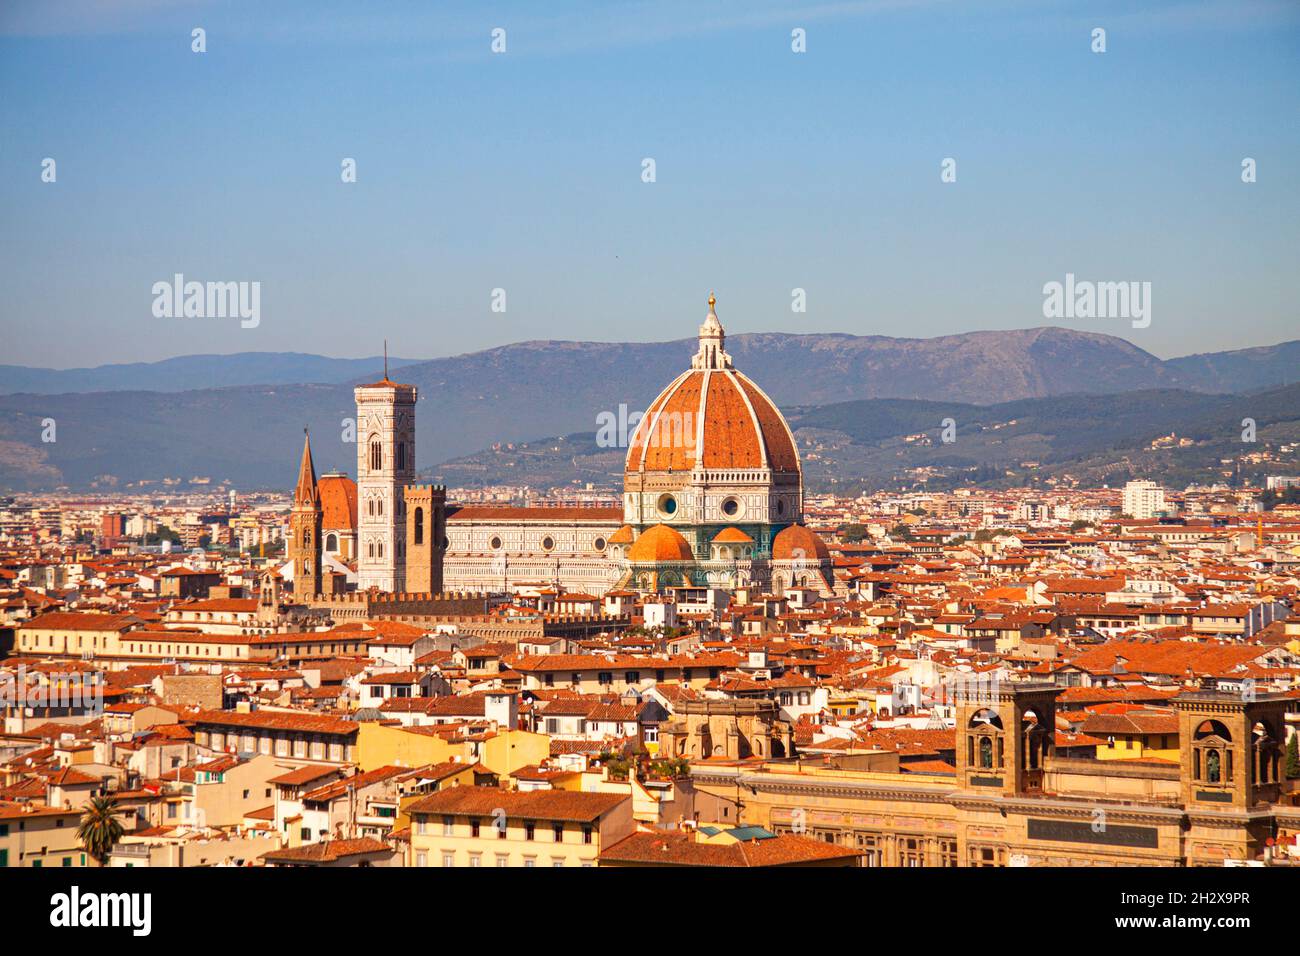 Santa Maria del Fiore cathedral in Florence, Italy. Aereal panoramic view with dome by Filippo Brunelleschi, and bell tower dominating the skyline in Stock Photo